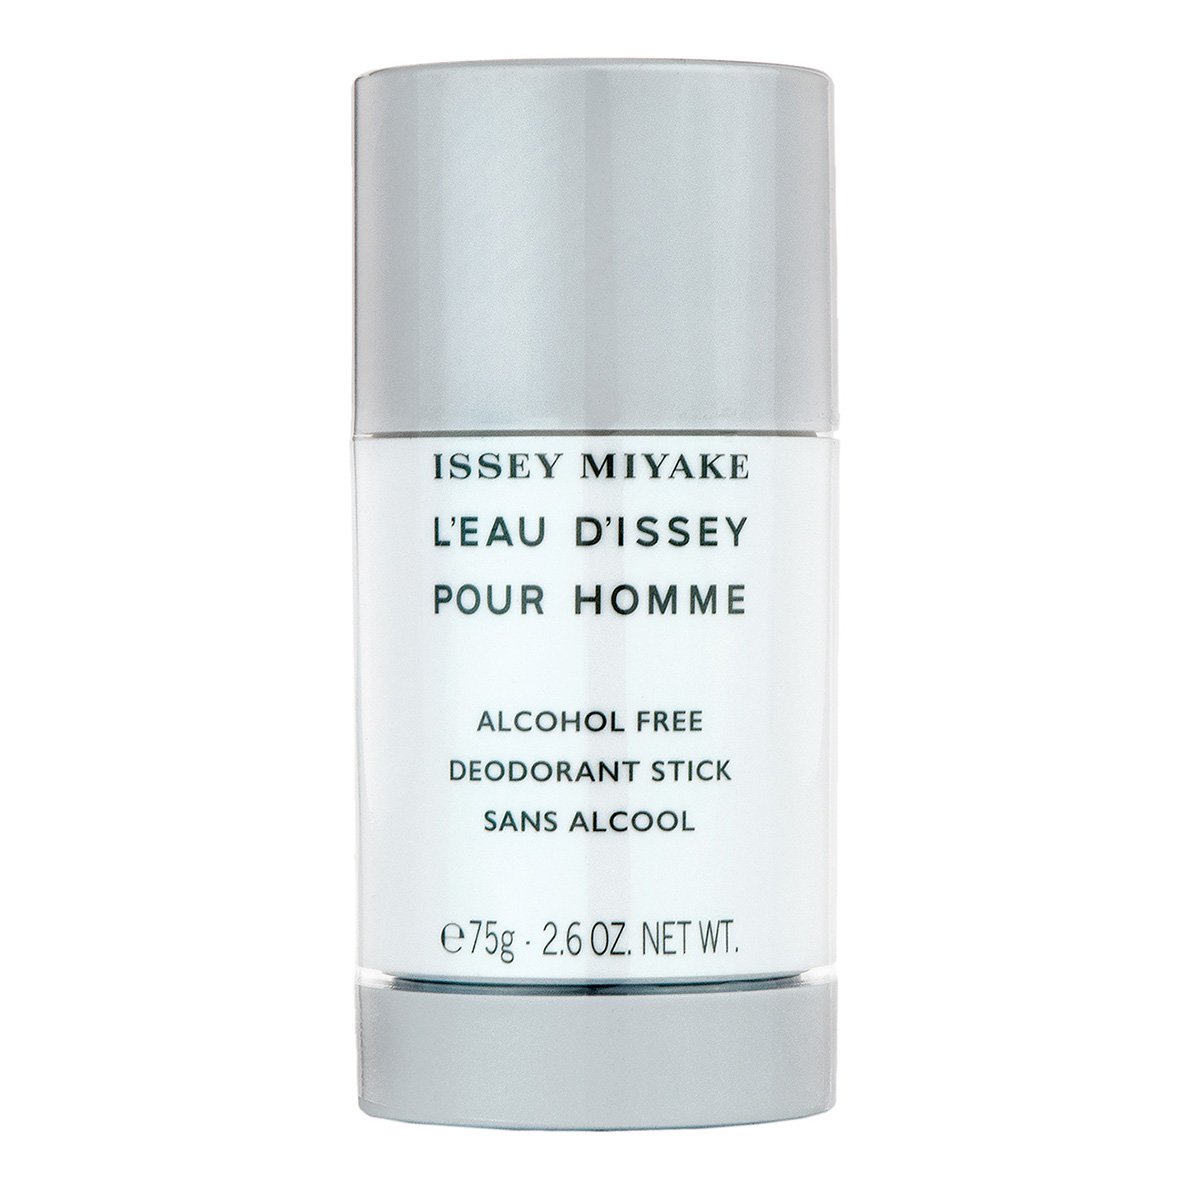 Issey Miyake L'eau D'issey Pour Homme Alcohol Free Deodorant Stick 75g ...